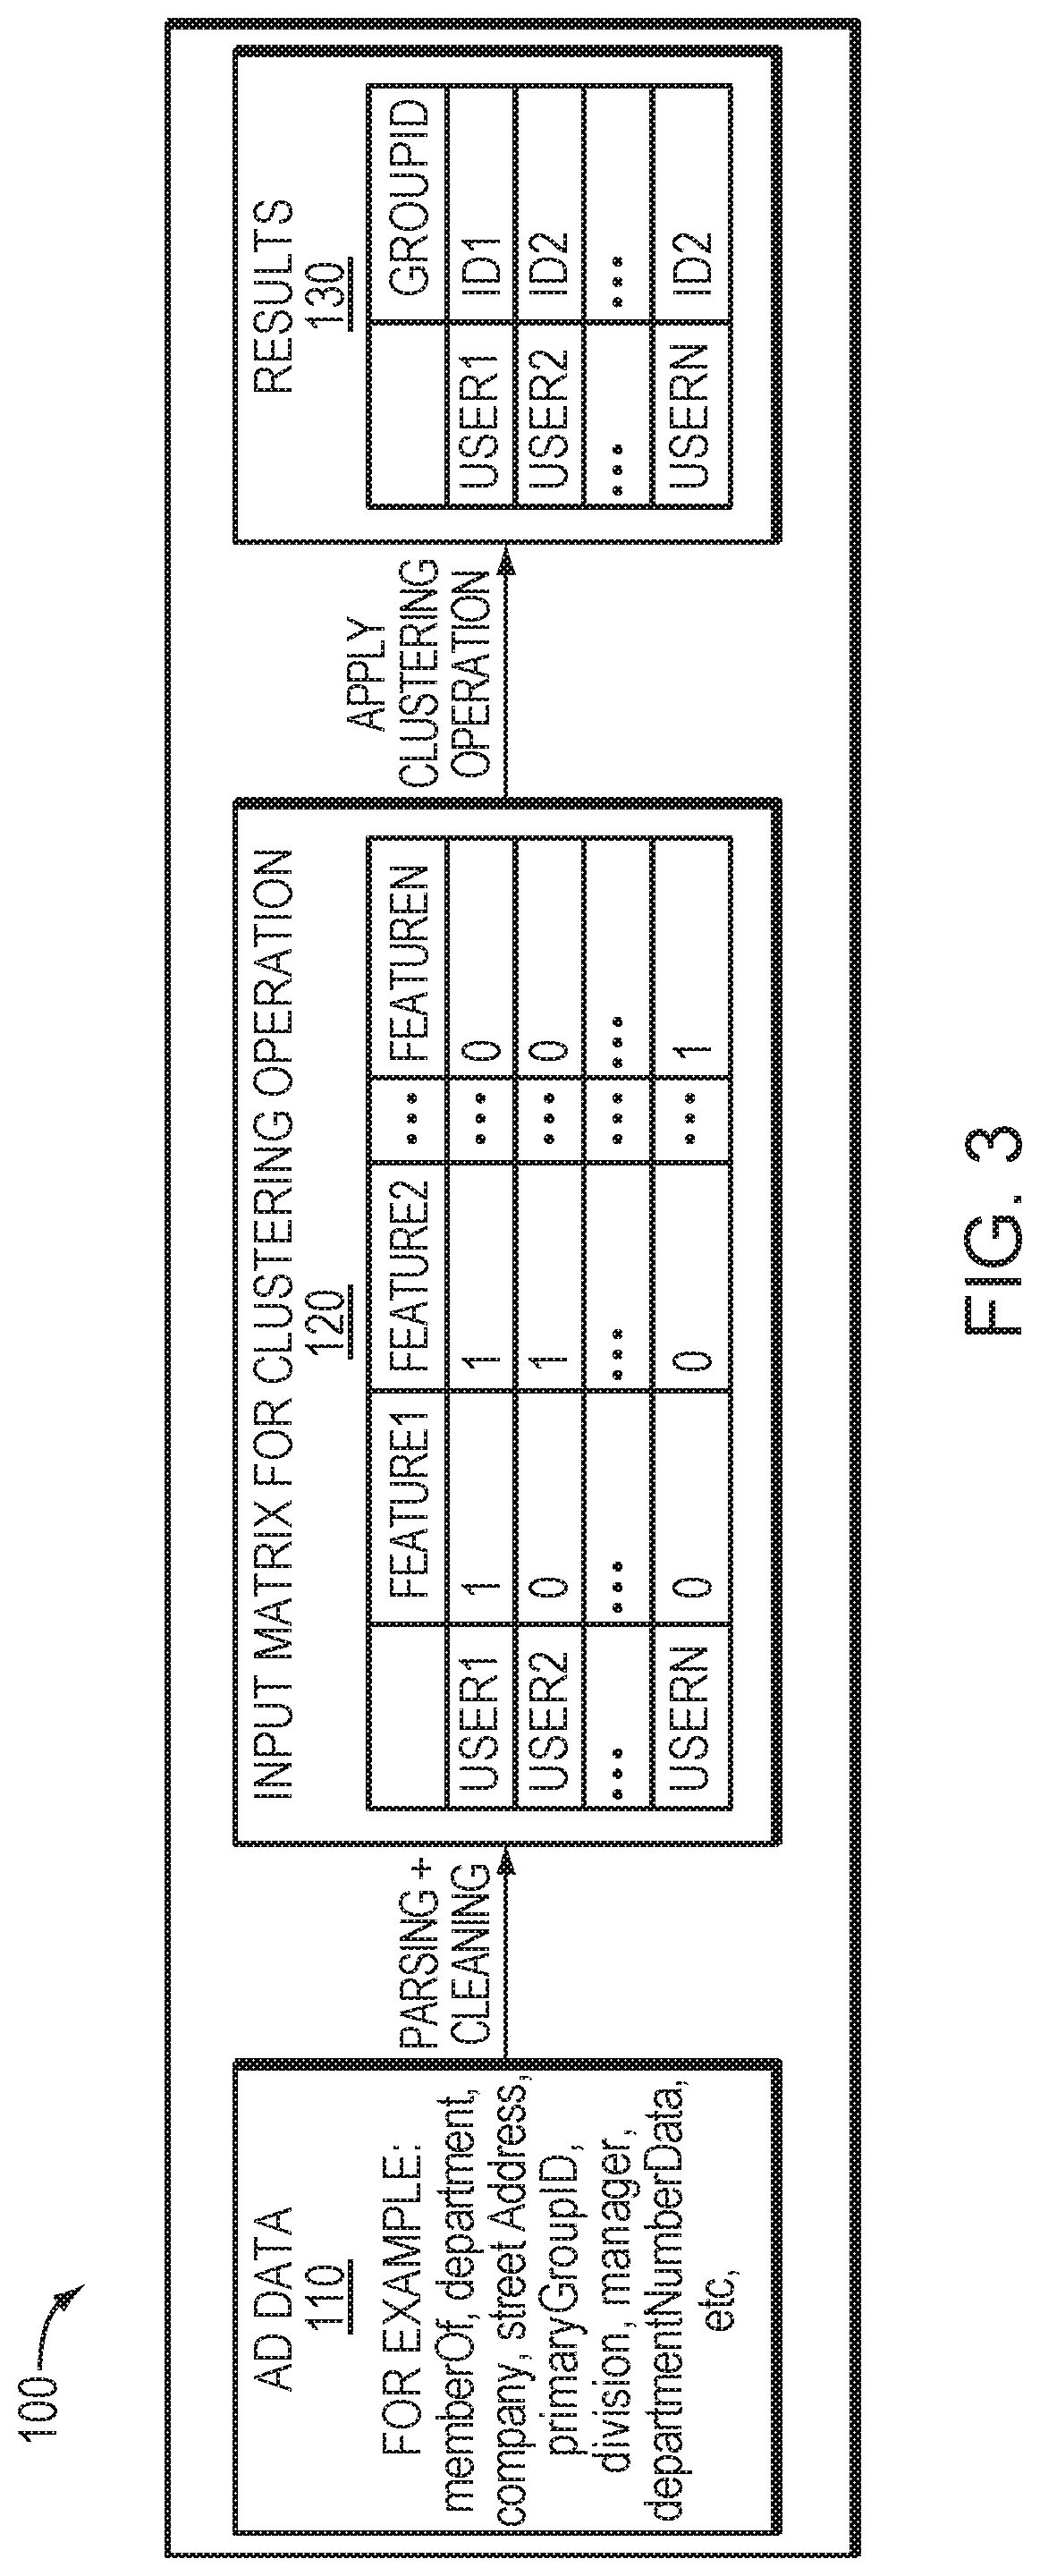 Method, apparatus and computer program product for providing security via user clustering